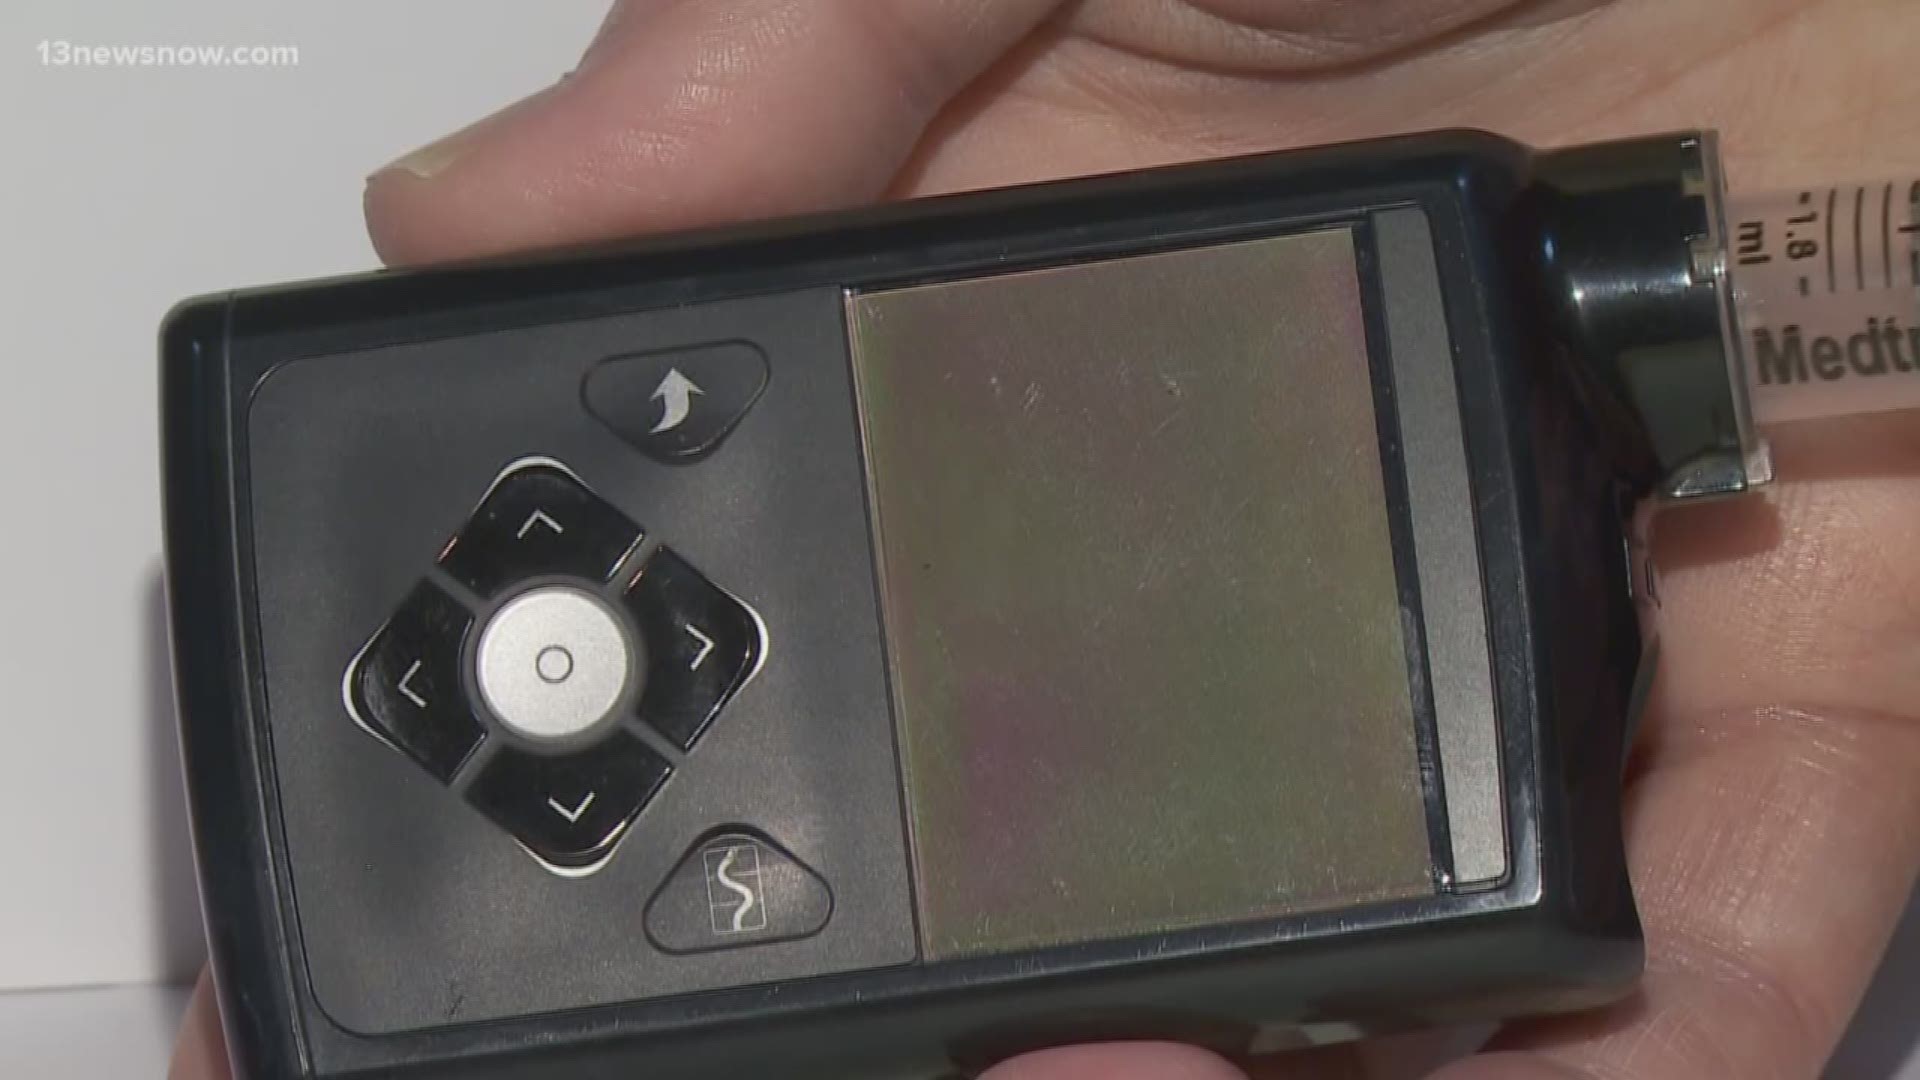 13News Now Meghan Puryear spoke with a local educator to learn more about the potential impacts of this insulin pump recall.